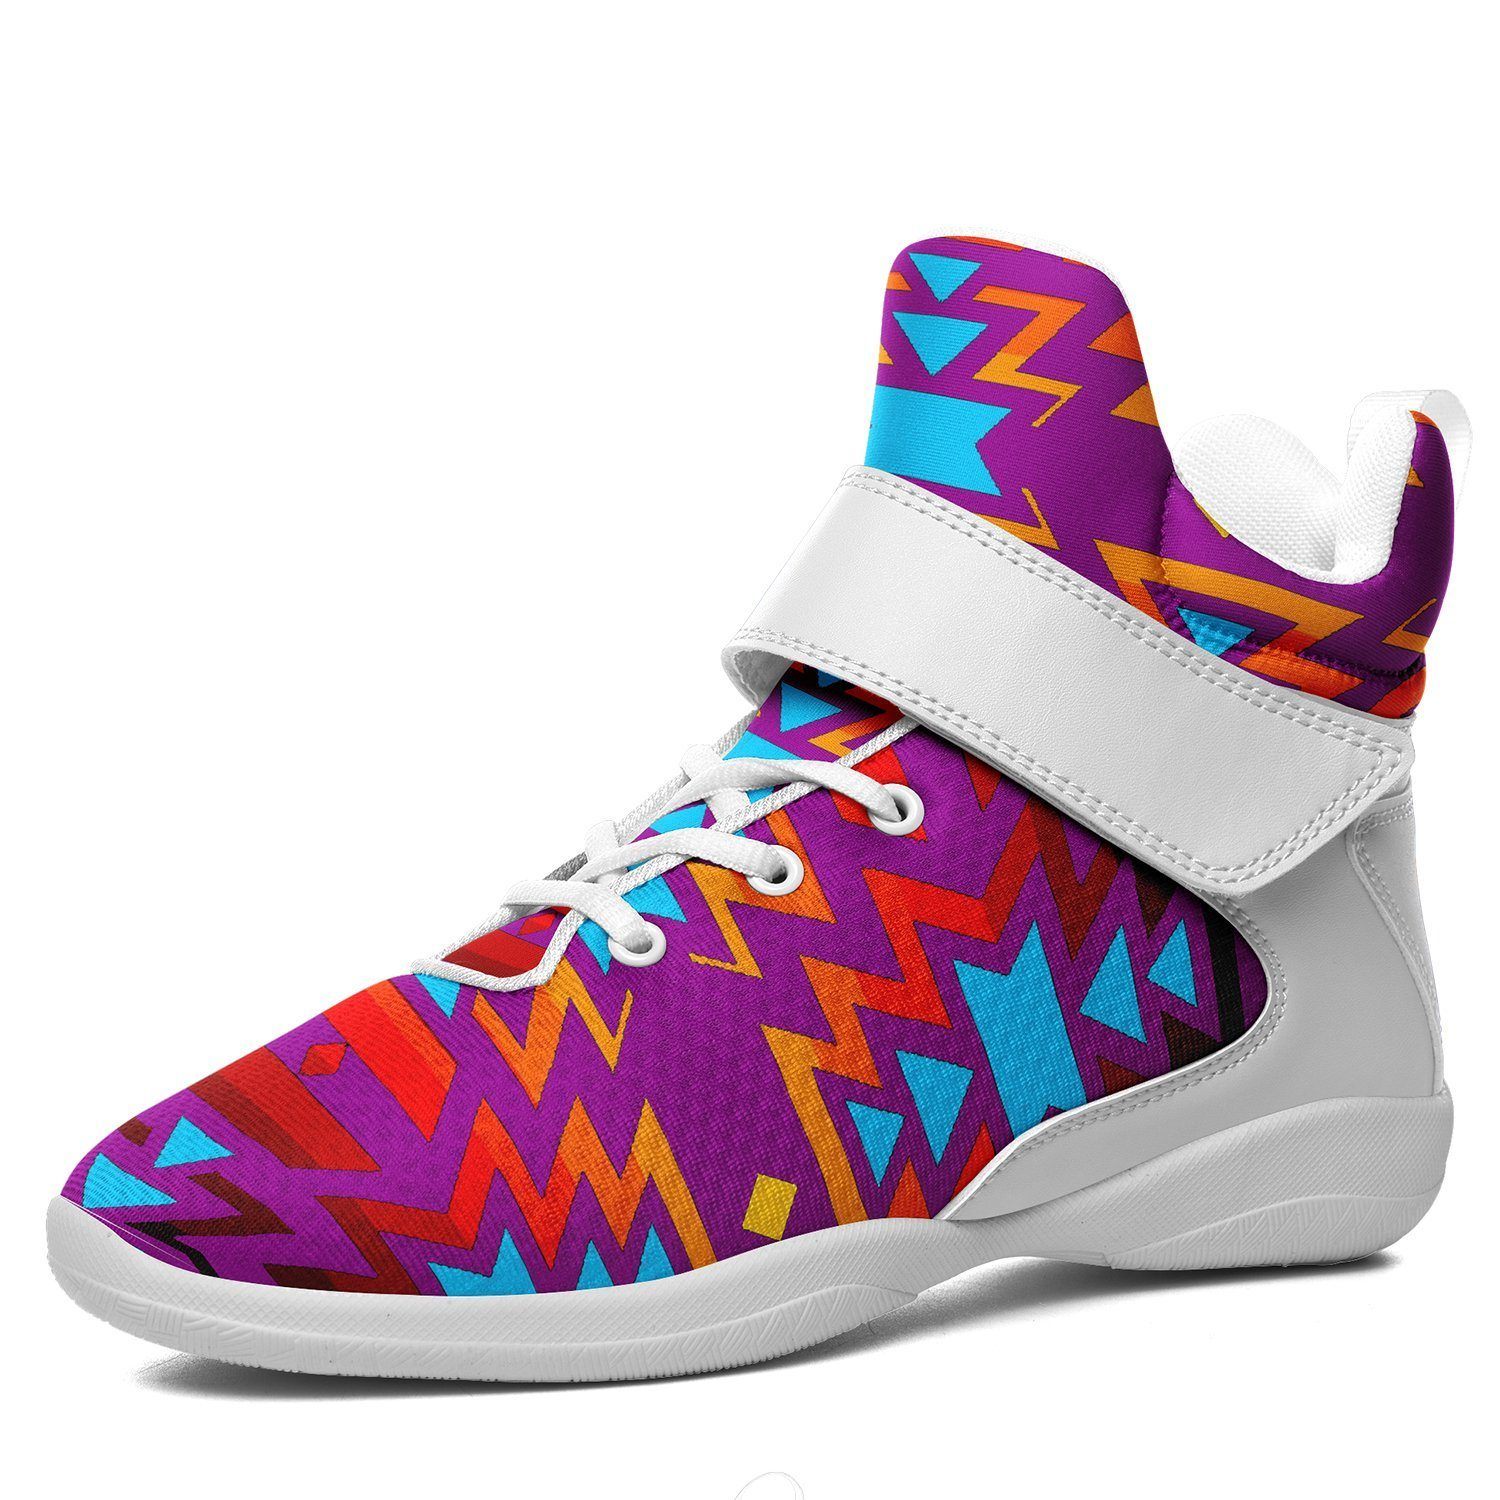 Fire Colors and Turquoise Purple Ipottaa Basketball / Sport High Top Shoes - White Sole 49 Dzine US Men 7 / EUR 40 White Sole with White Strap 